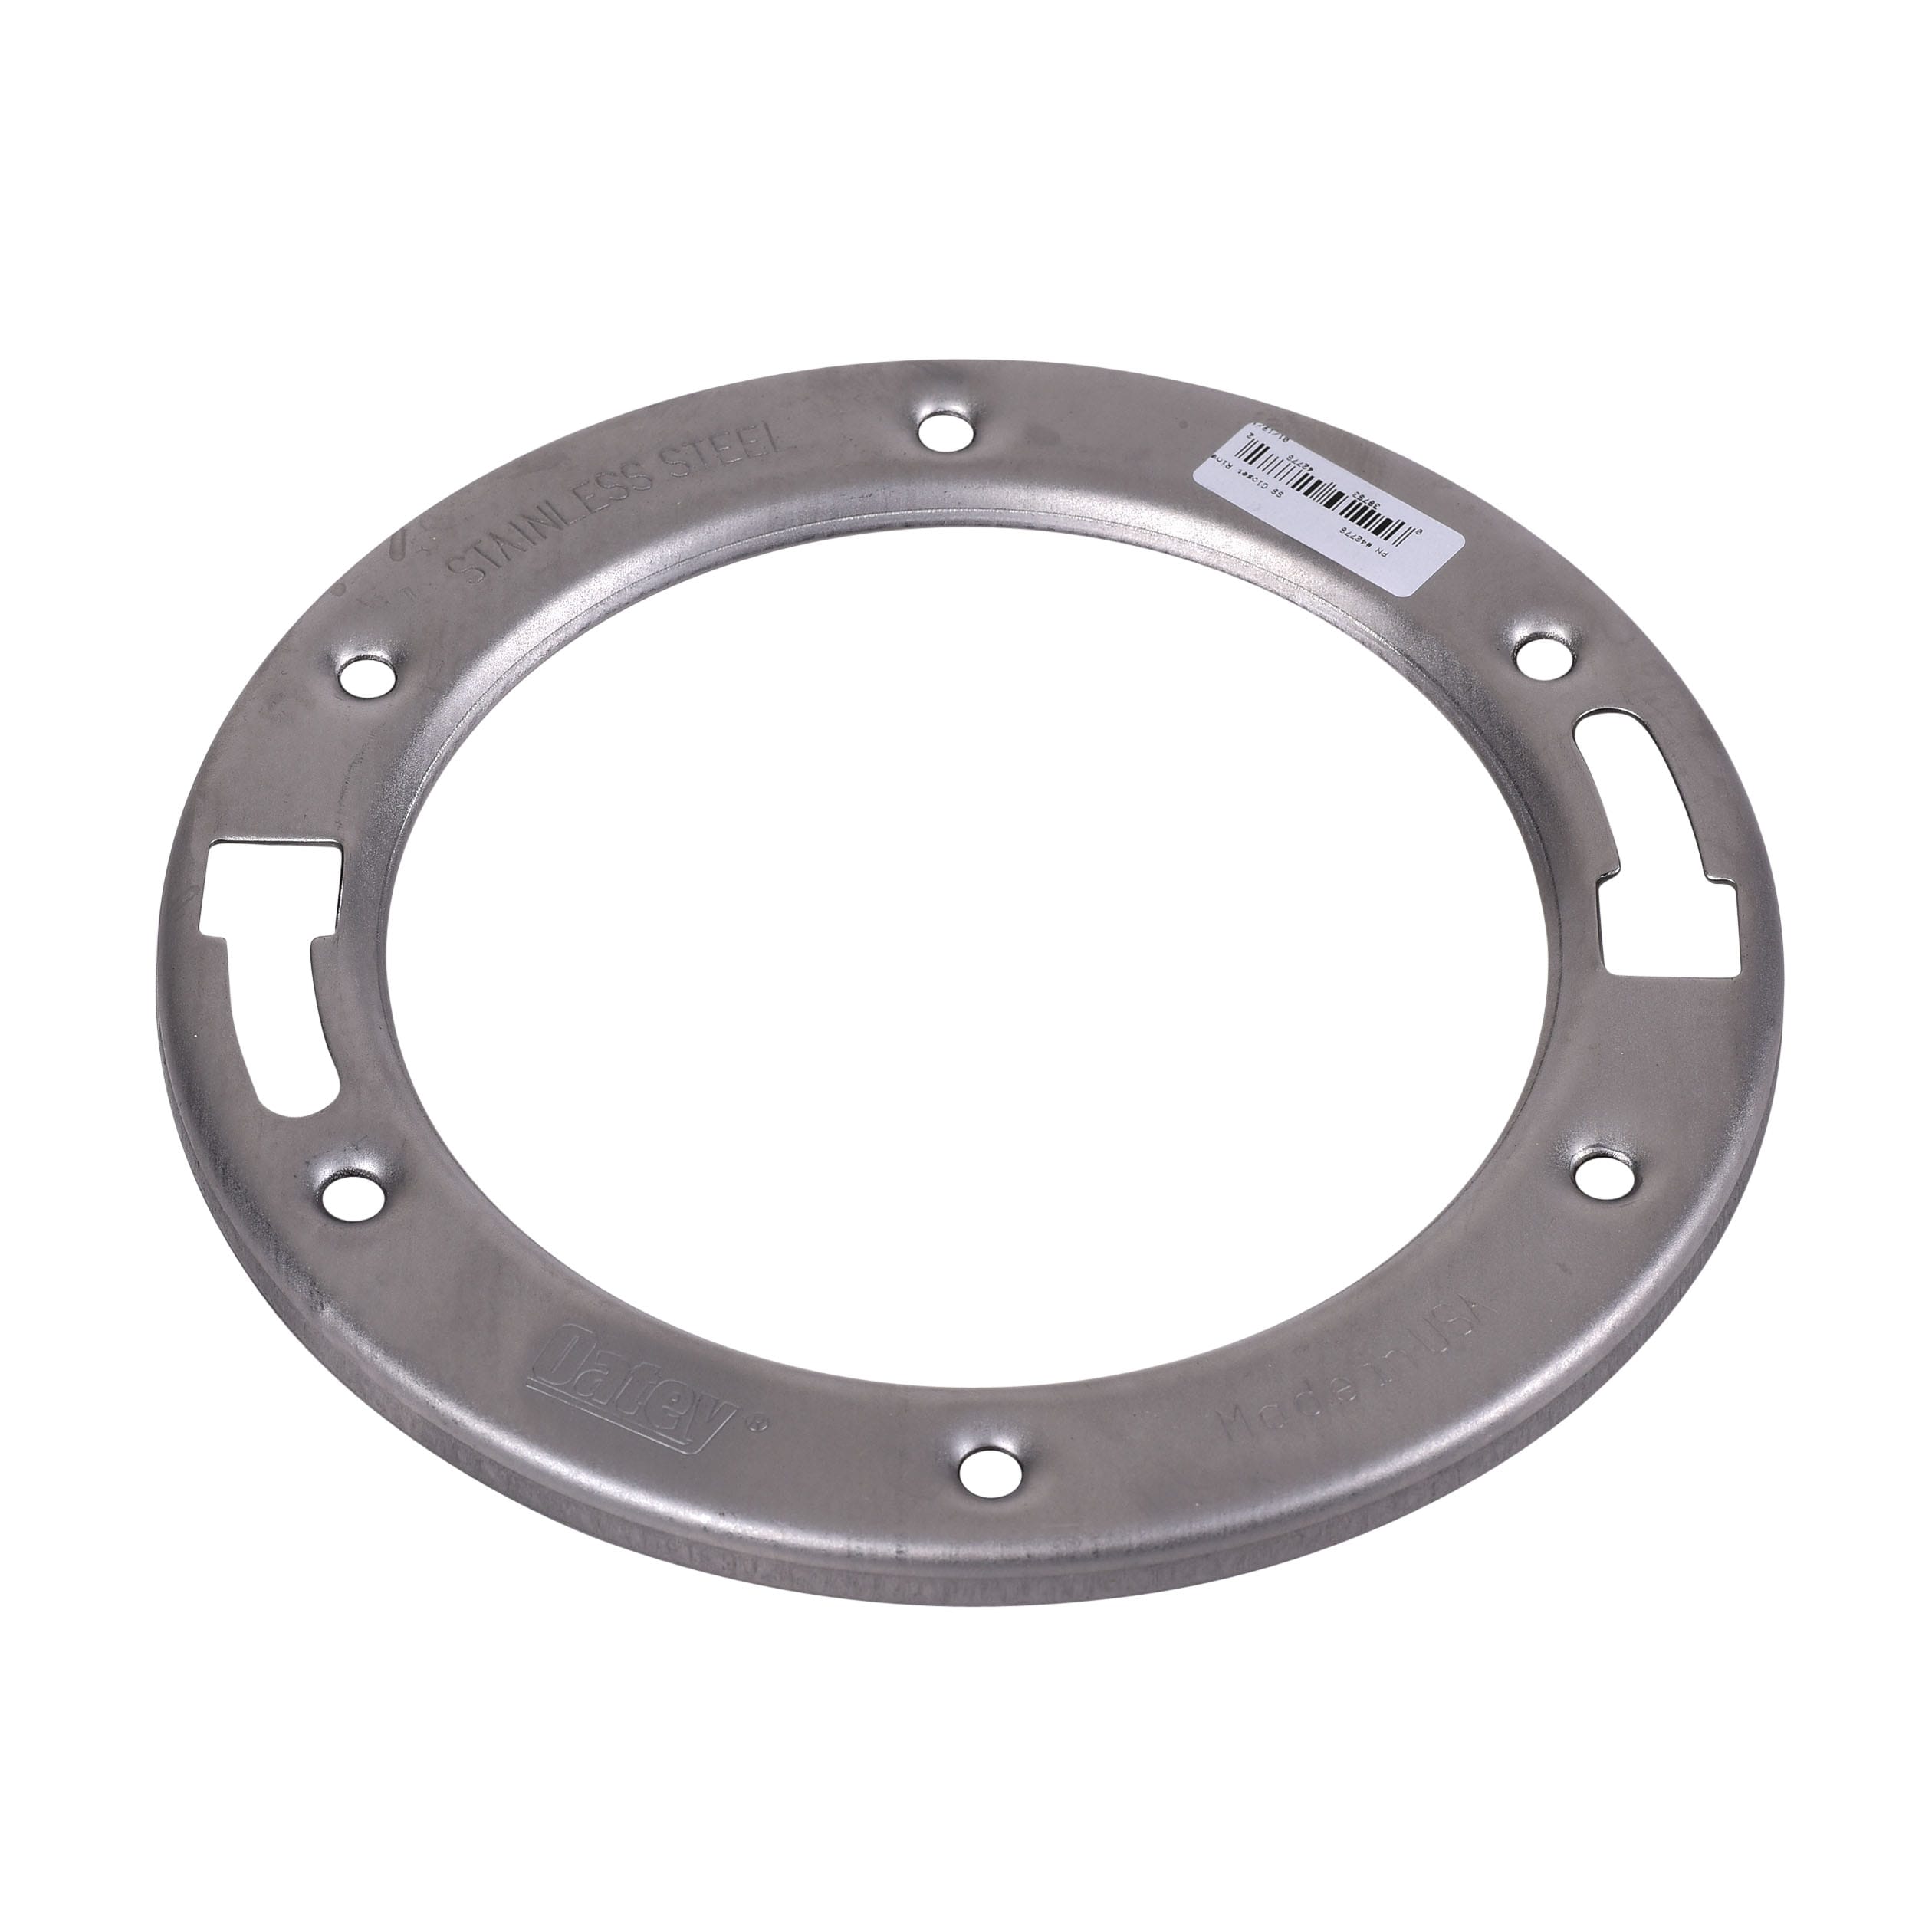 Ring Joint Type Flanges – The Piping Engineering World